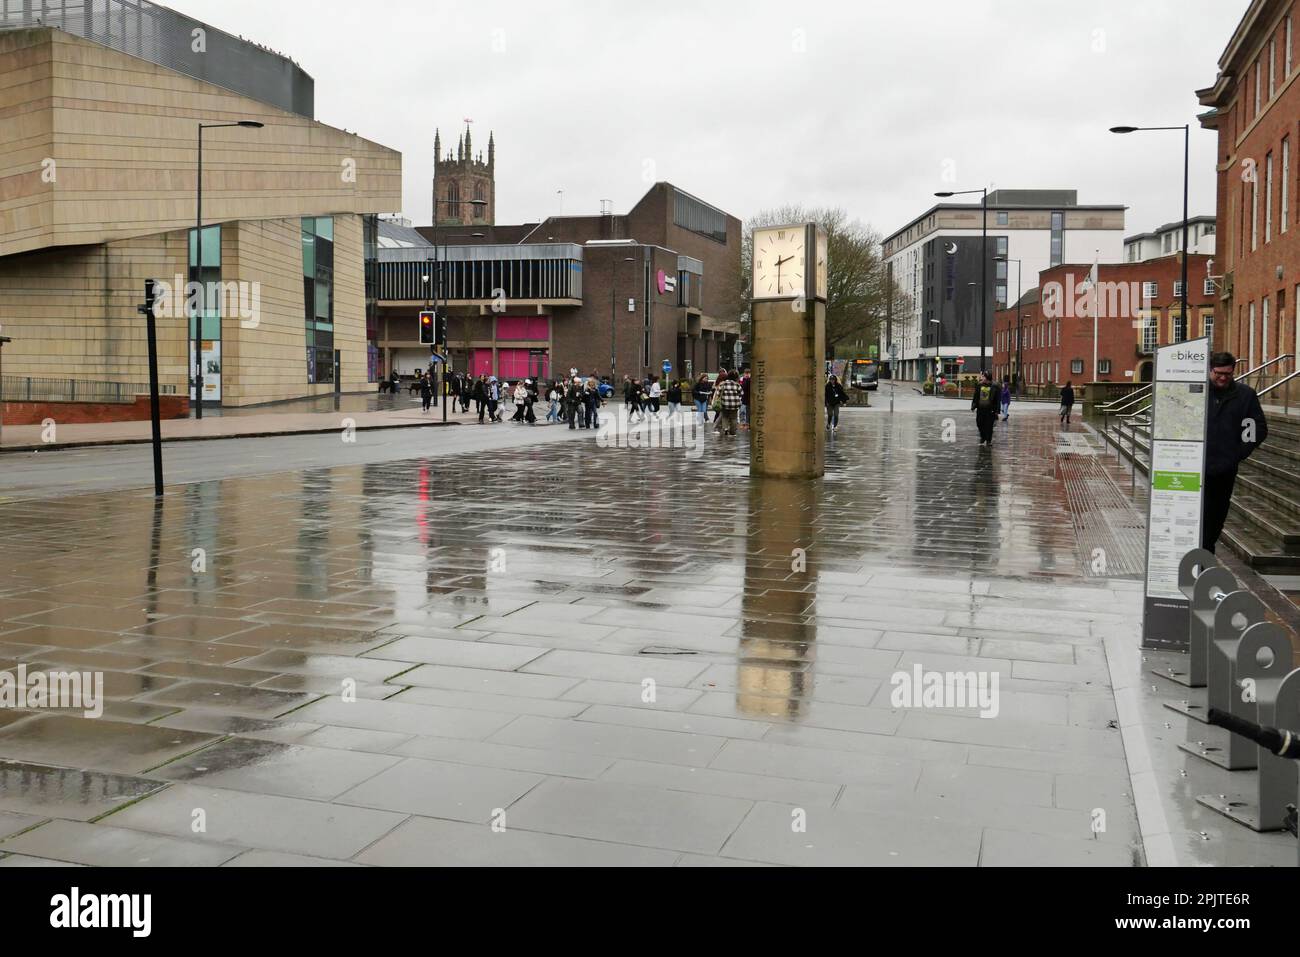 The Clock outside the council house in the centre of Derby just after the rain showing its reflection on the wet pavement. Stock Photo